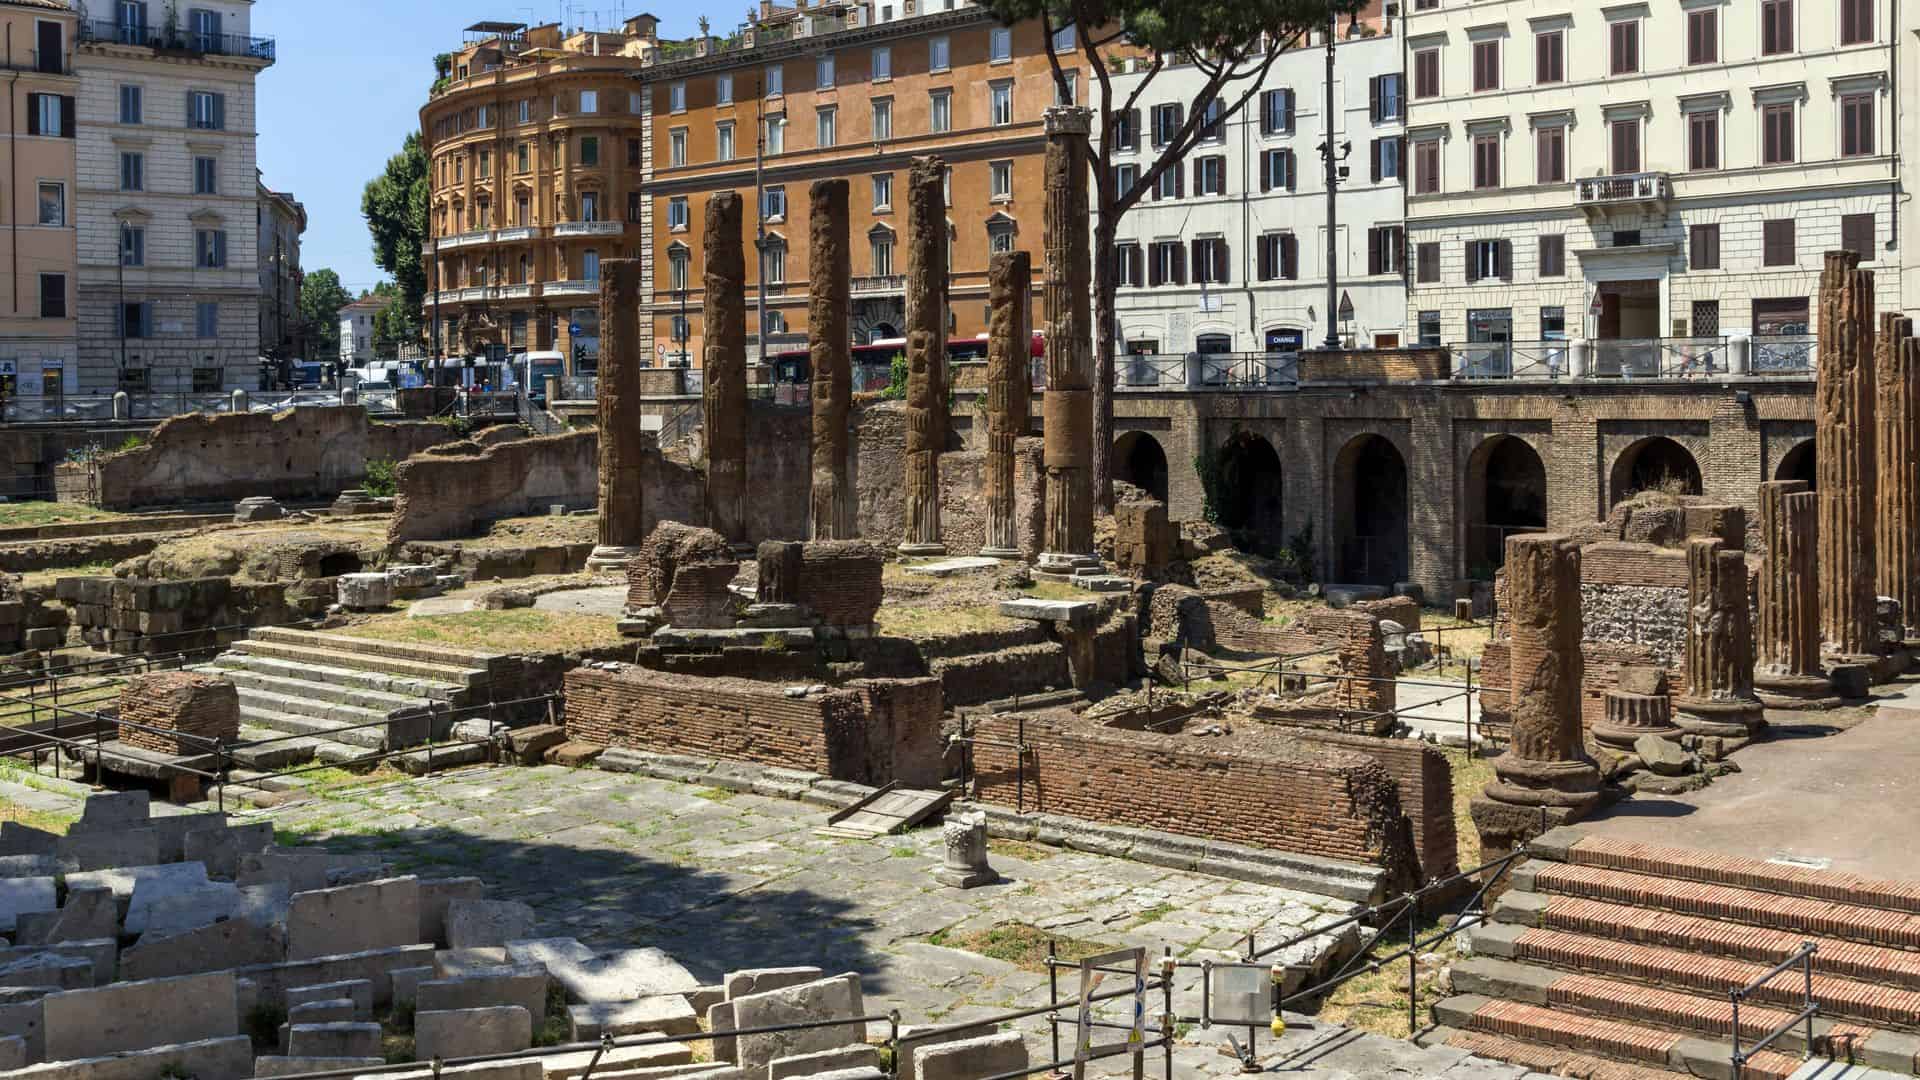 A view of the ruins in Largo di Torre Argentina